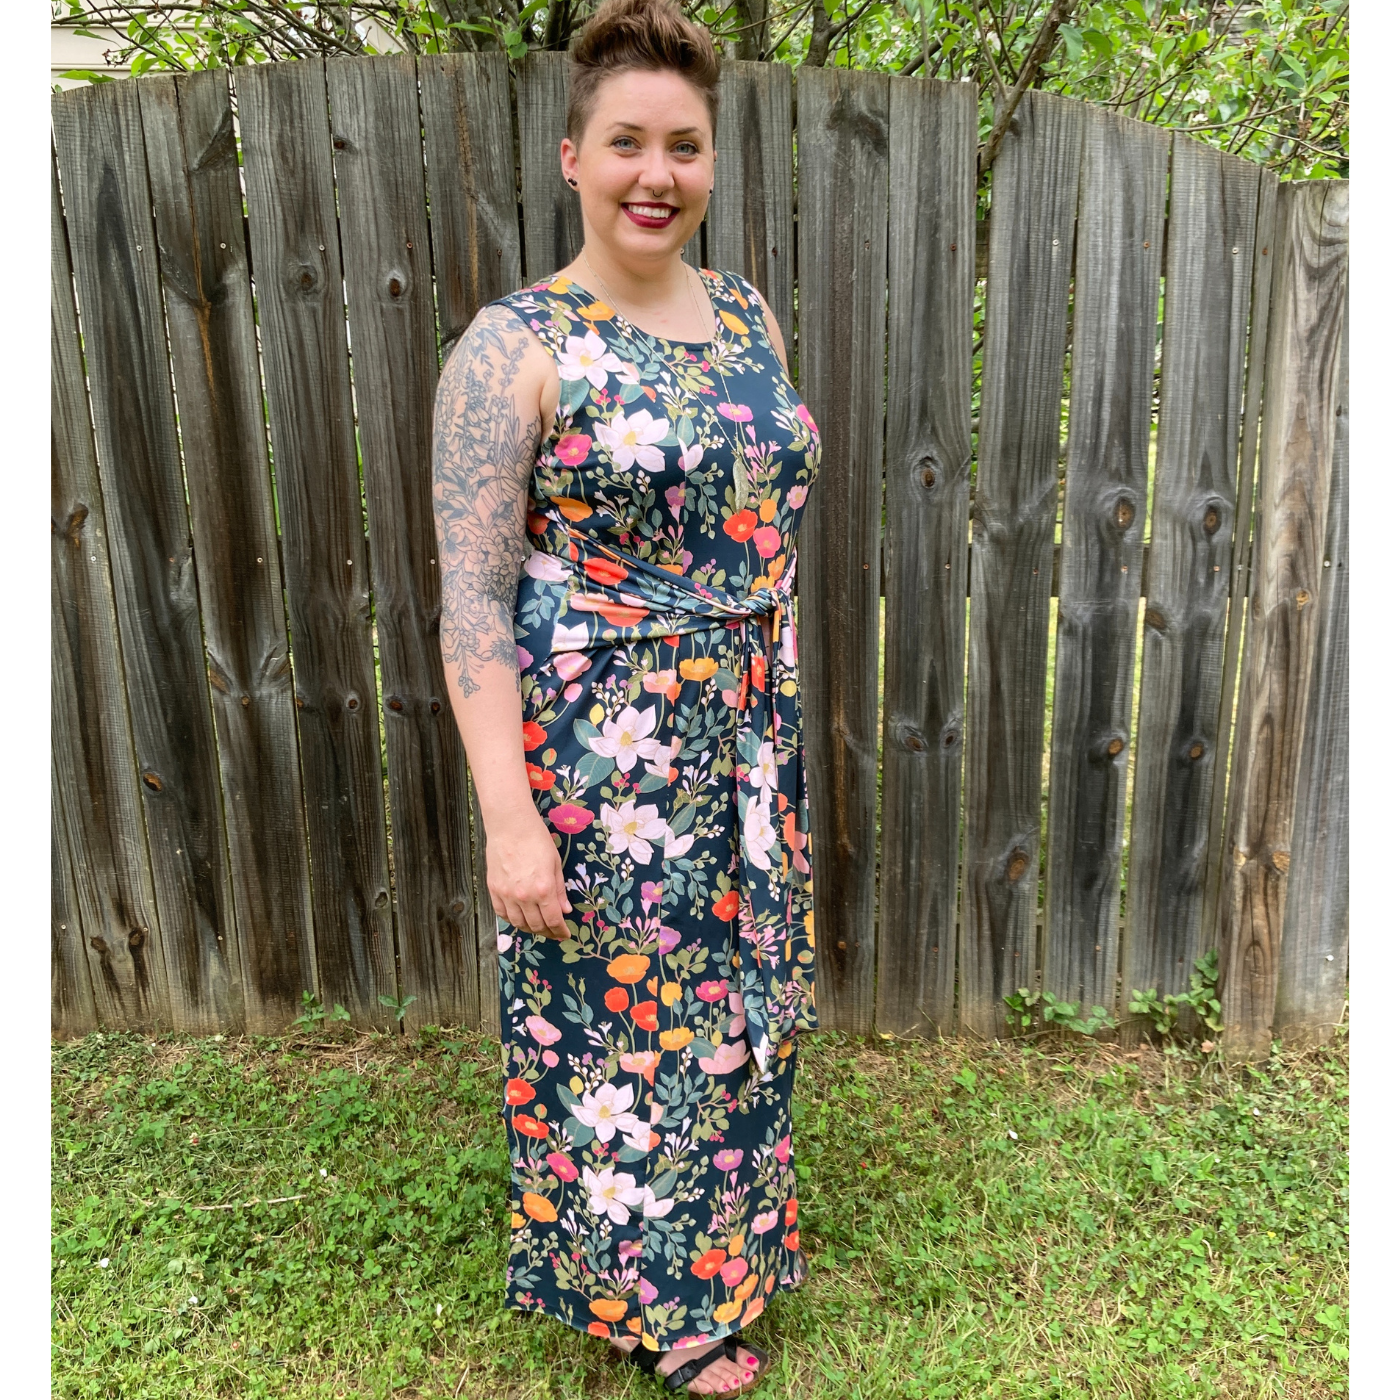 Jessica stands smiling at the camera wearing a dress that has two thin fabric strips that tie in the front. The fabric has a black background and a floral print with orange, yellow and pink poppies and green flowers around them. She is standing in a patch of grass near a tall wooden fence.